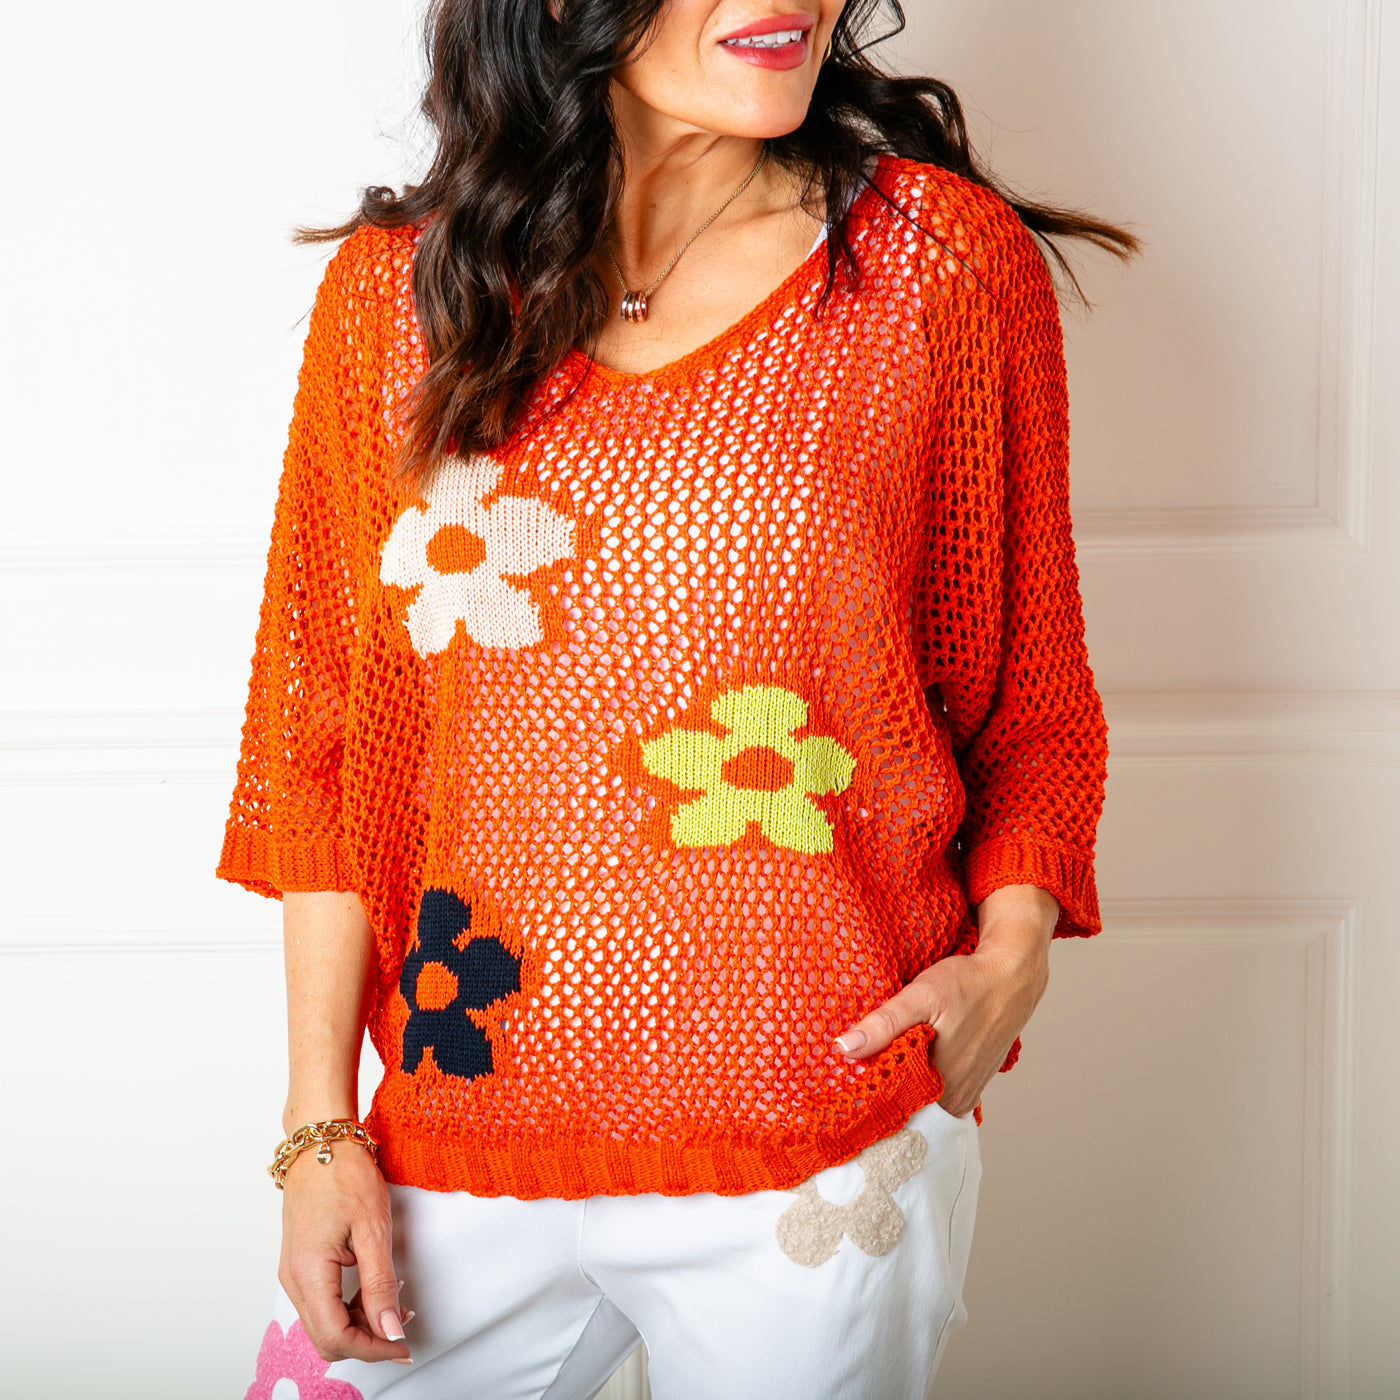 The orange crochet Flower Top featuring a bold vibrant flower pattern across the front